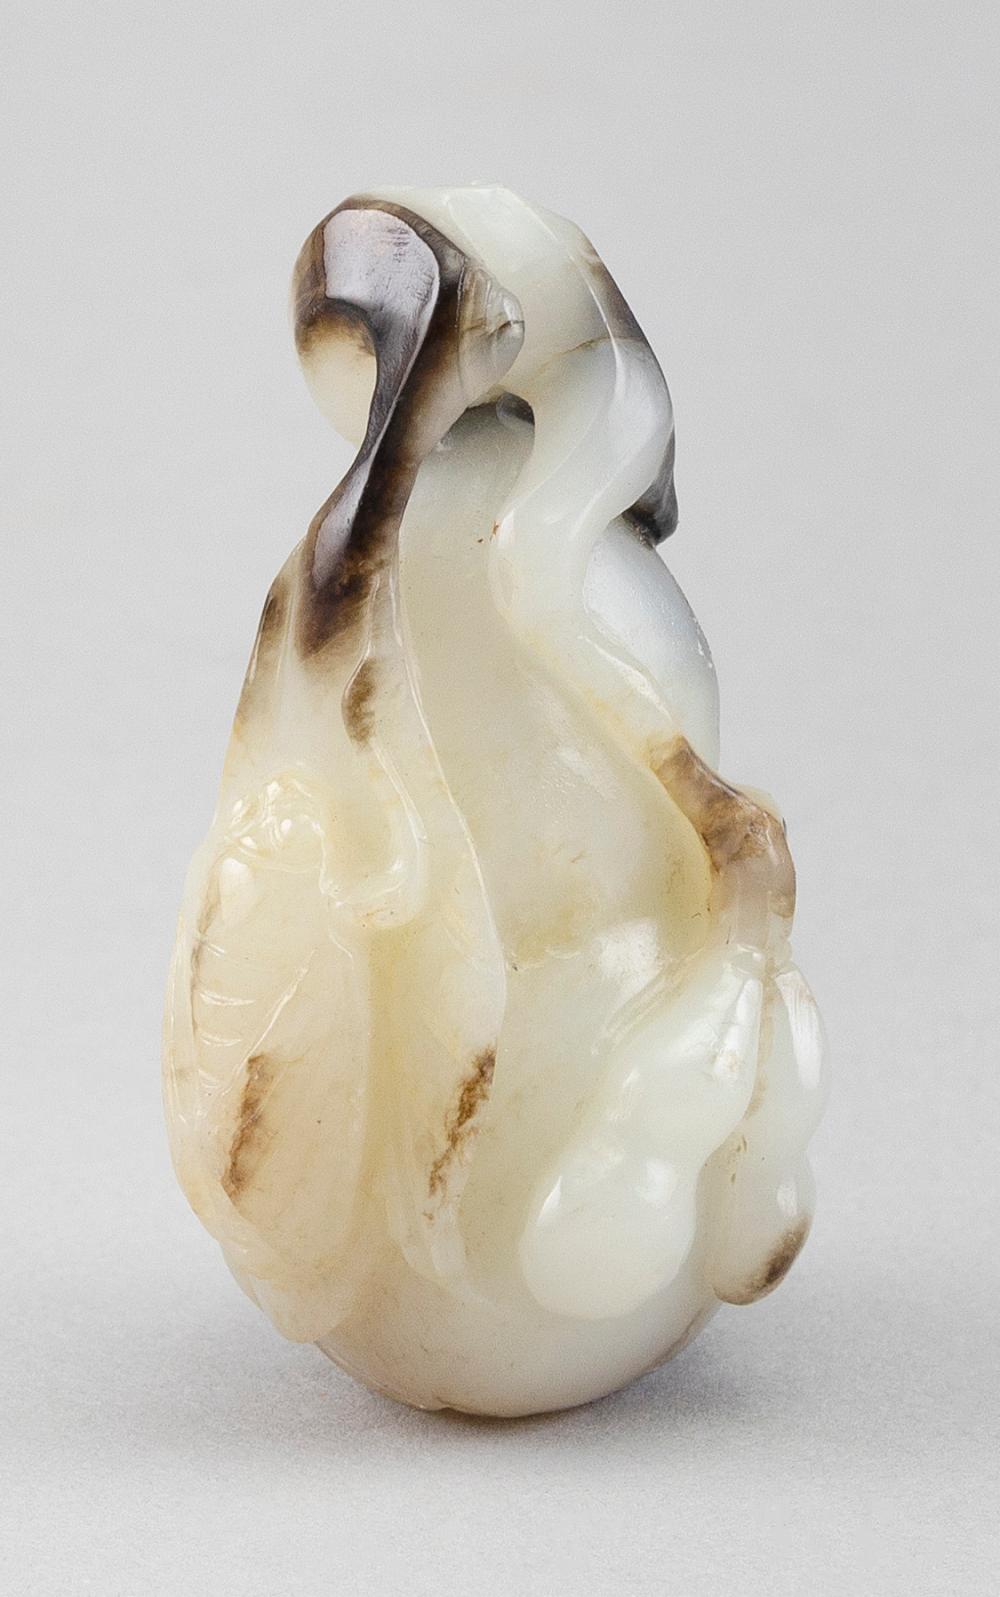 CHINESE WHITE AND BLACK JADE CARVING 34f64f